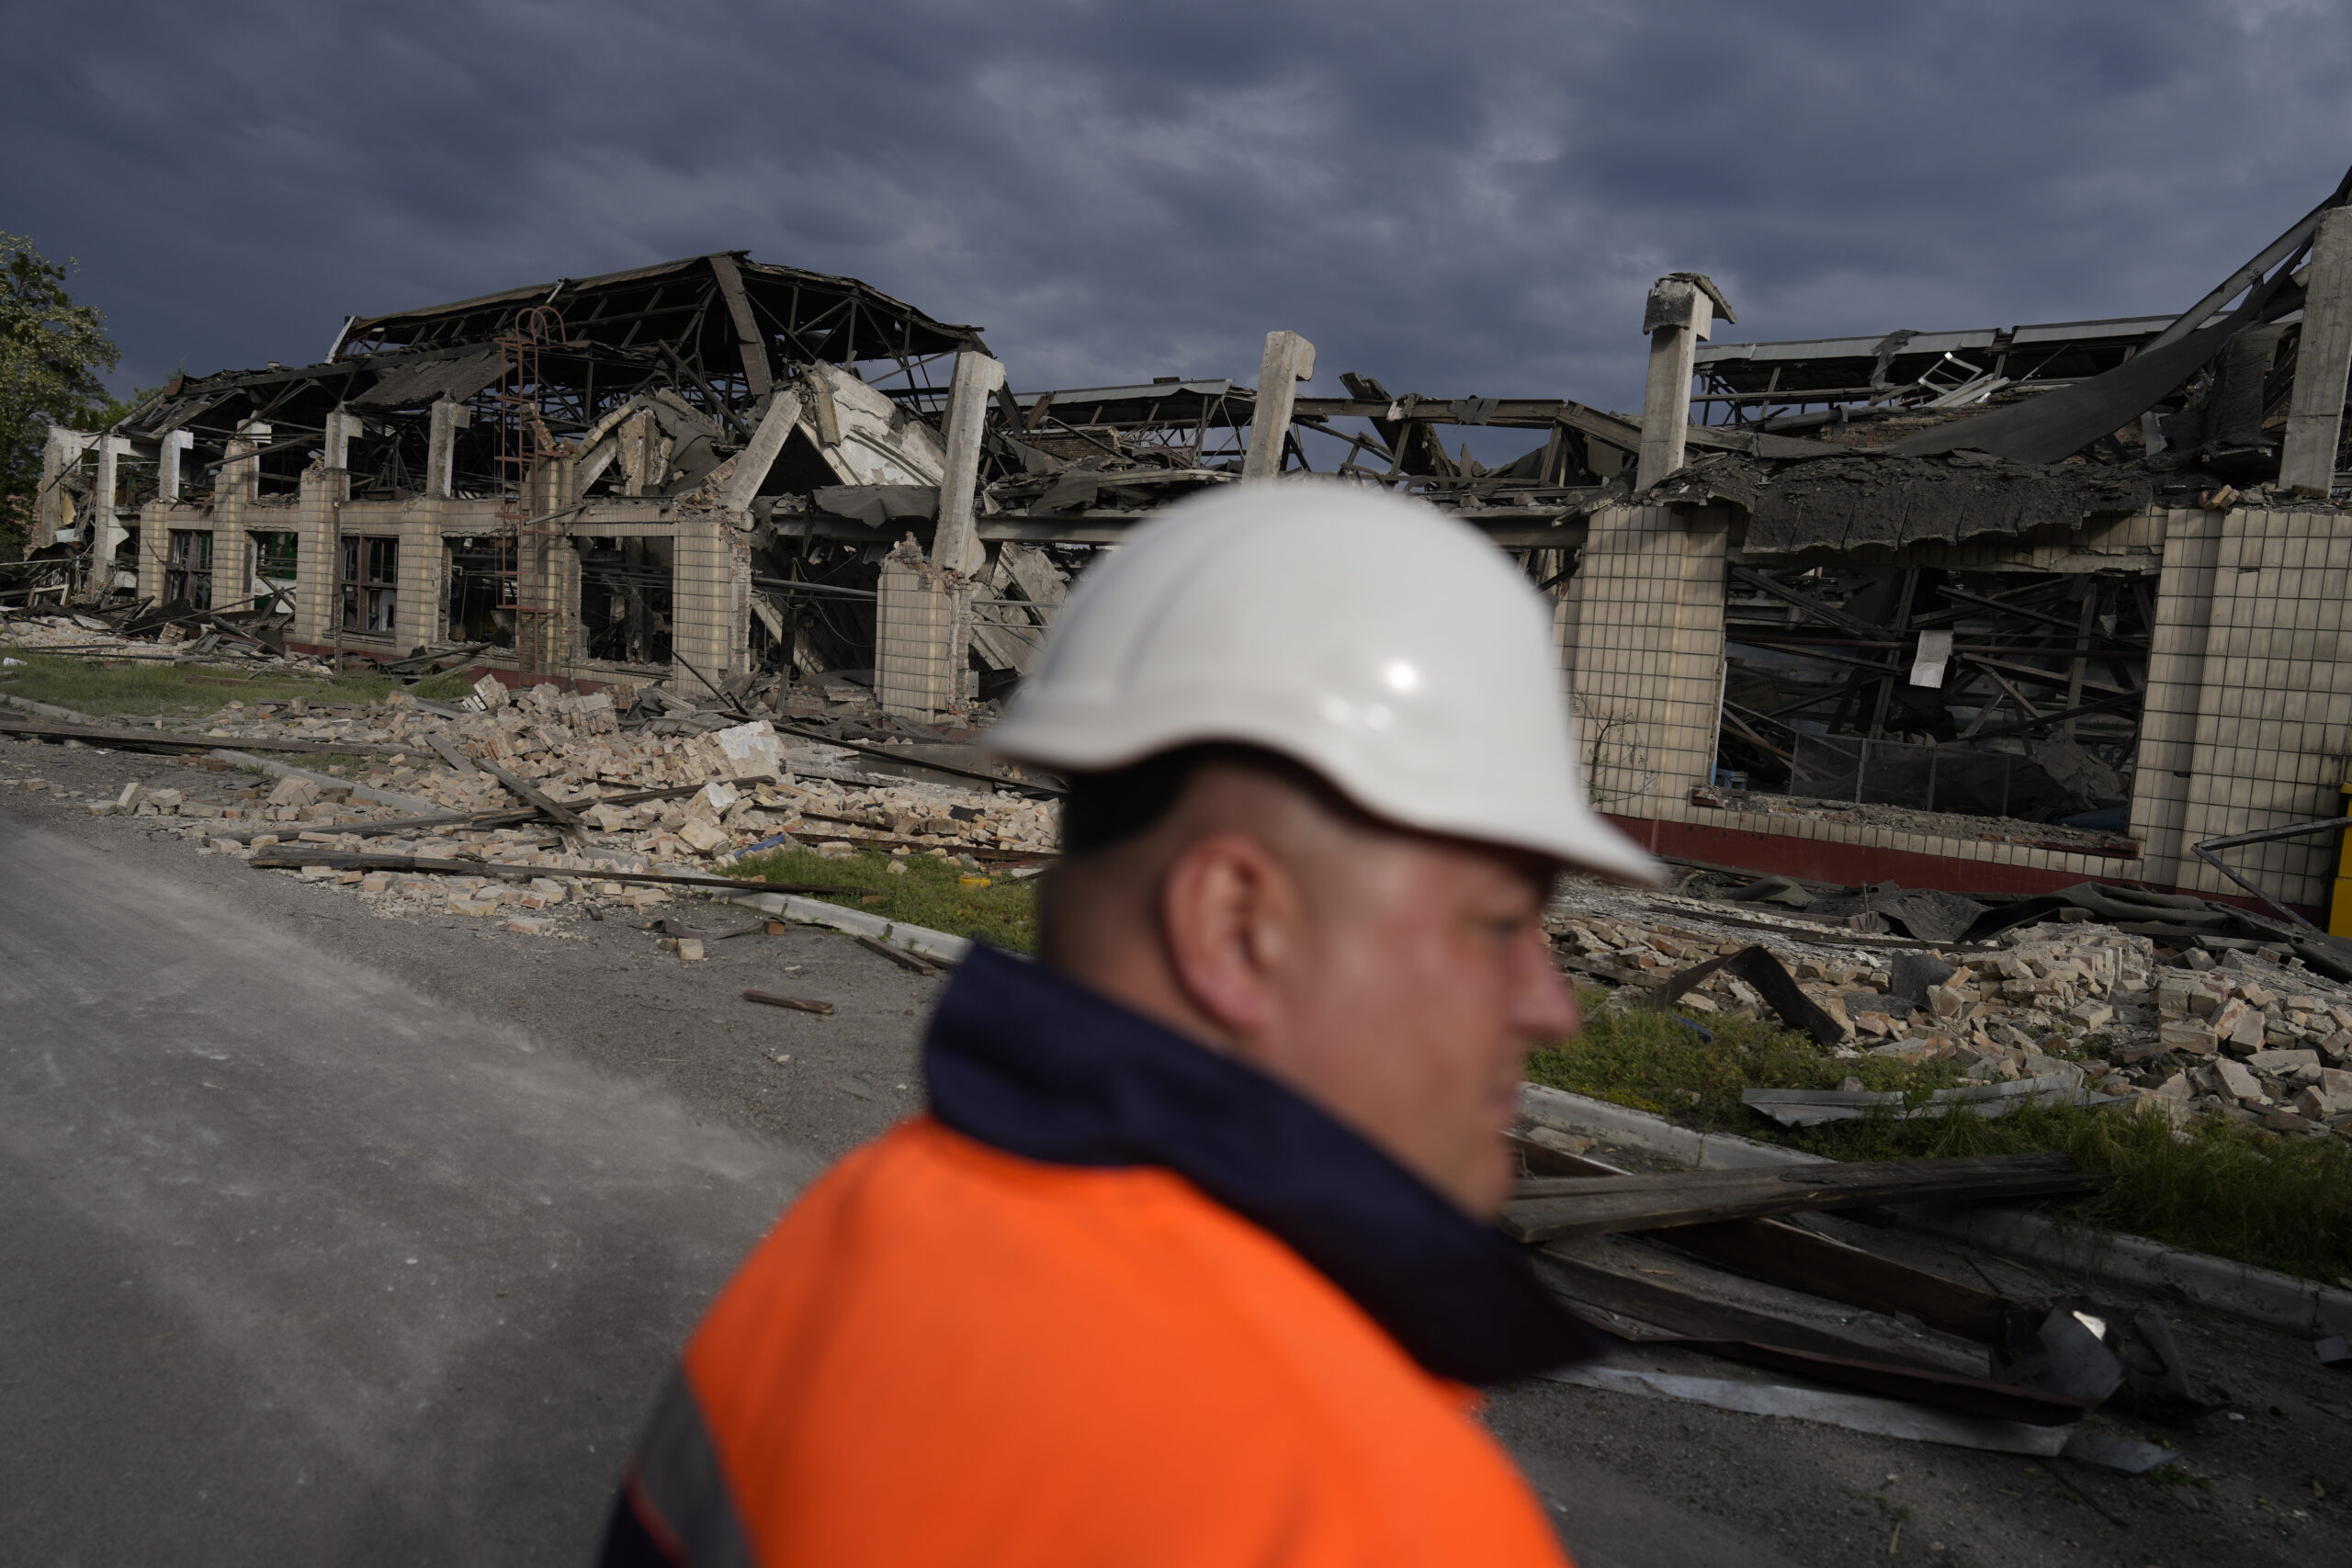 A worker looks at a railway service facility hit by a Russian missile strike in Kyiv, Ukraine, Sunday, June 5, 2022. (AP Photo/Natacha Pisarenko)